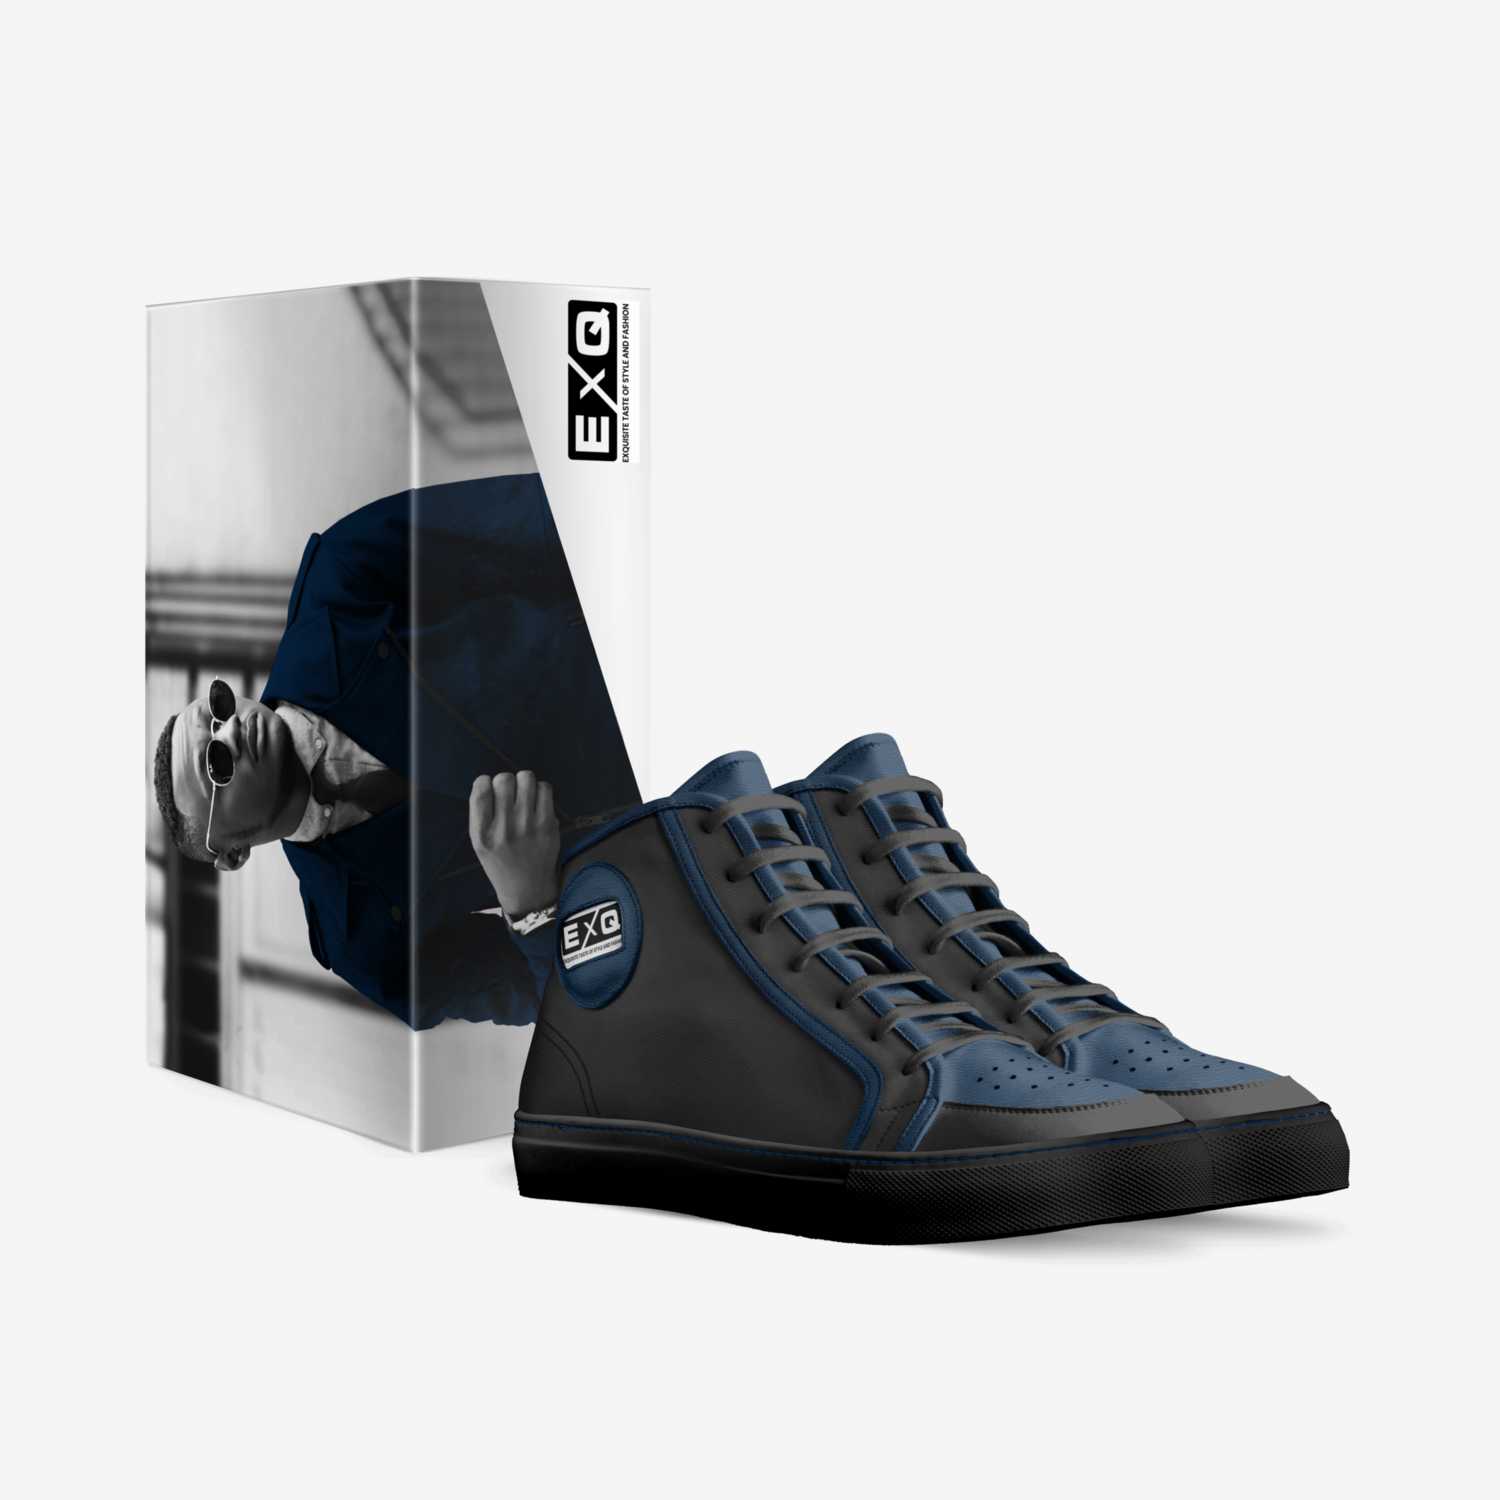 EXQ H.I.M. custom made in Italy shoes by Gralan Early | Box view